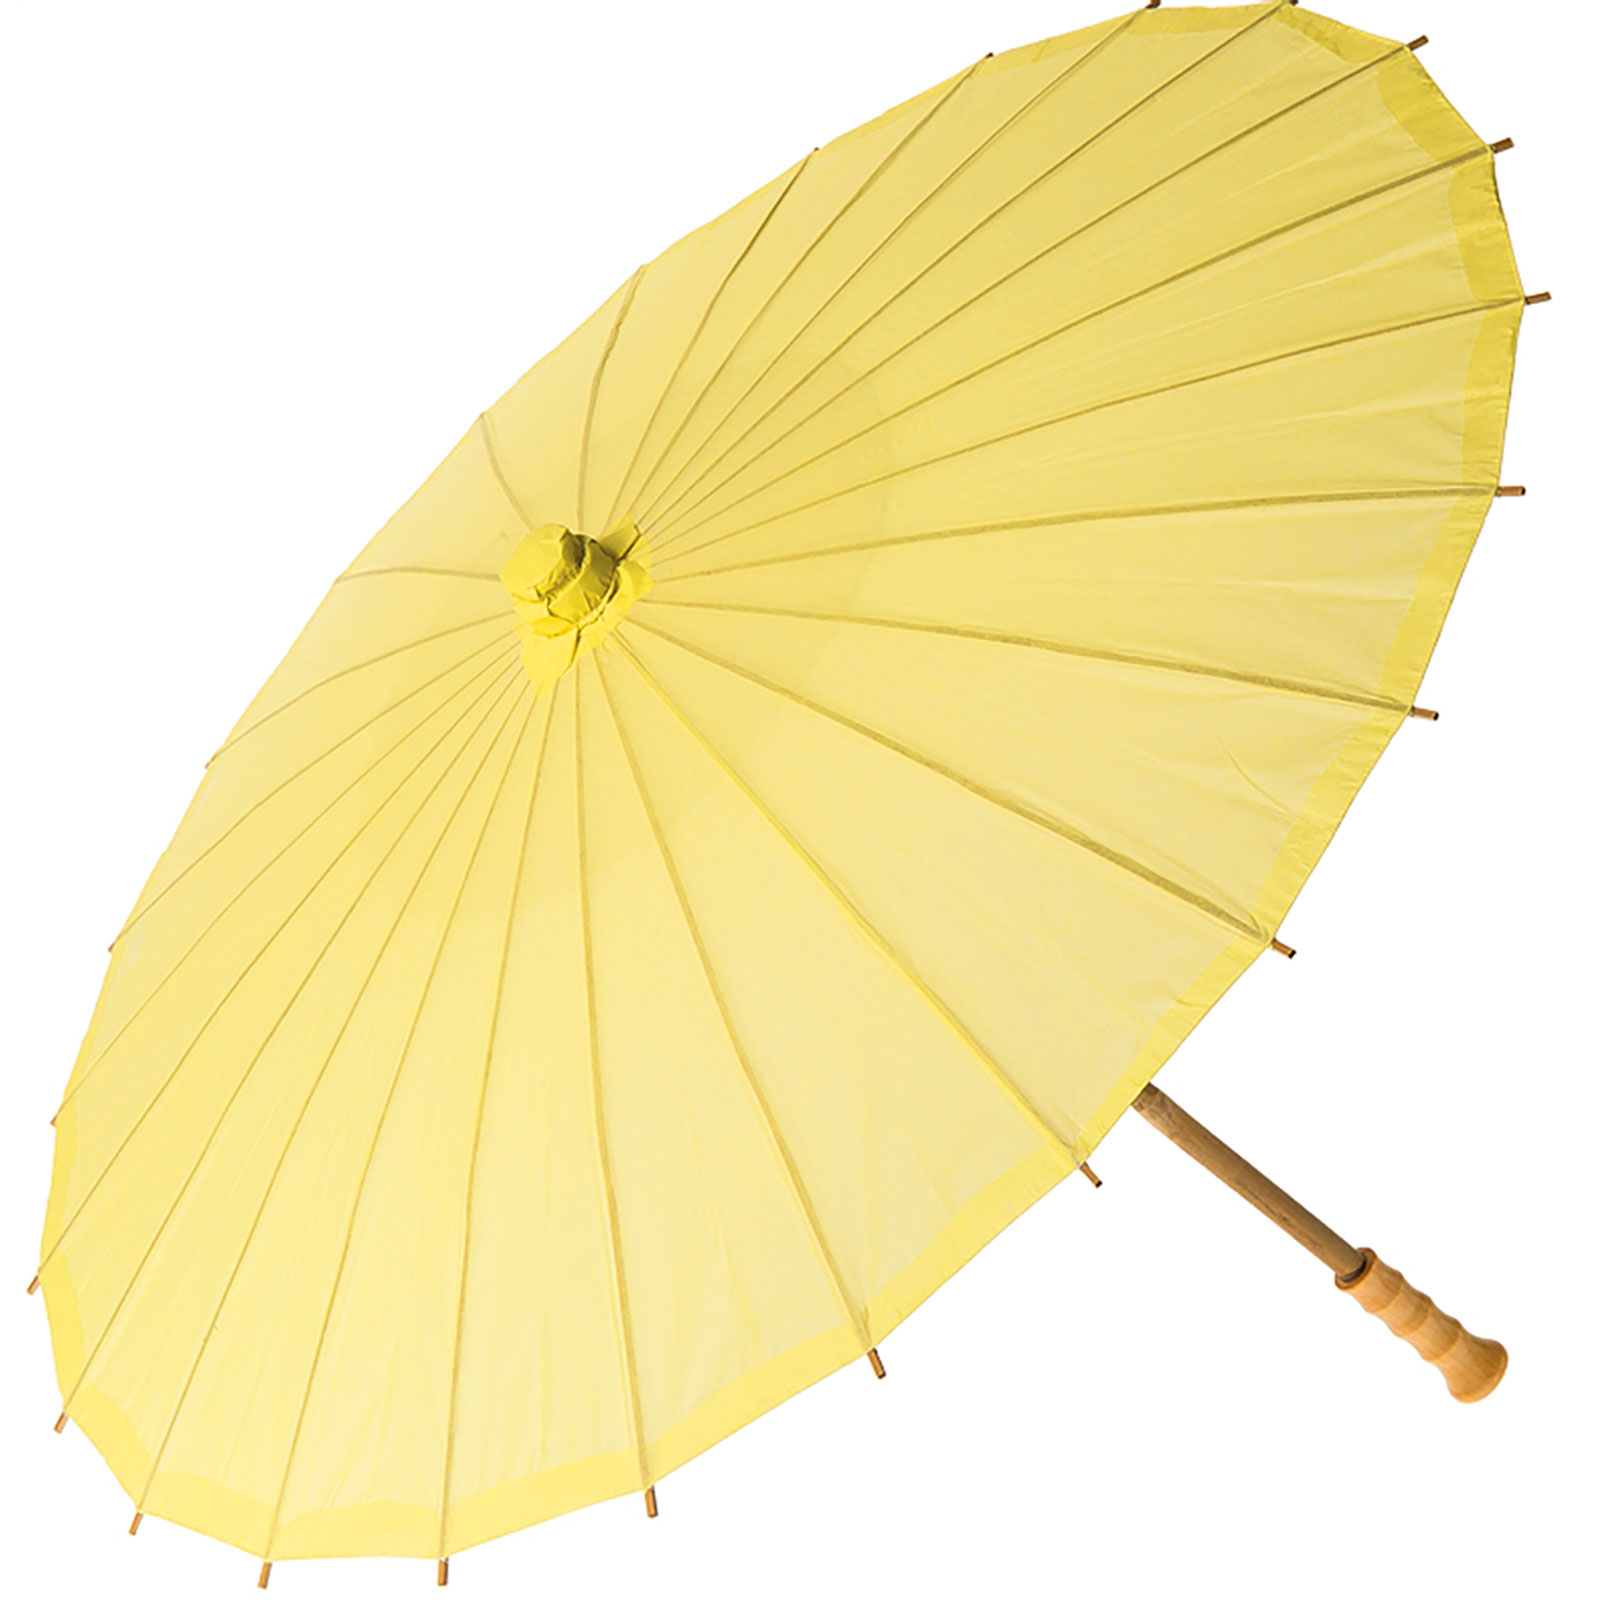 Chinese Paper and Bamboo Parasol with Elegant Handle - Lemon Yellow